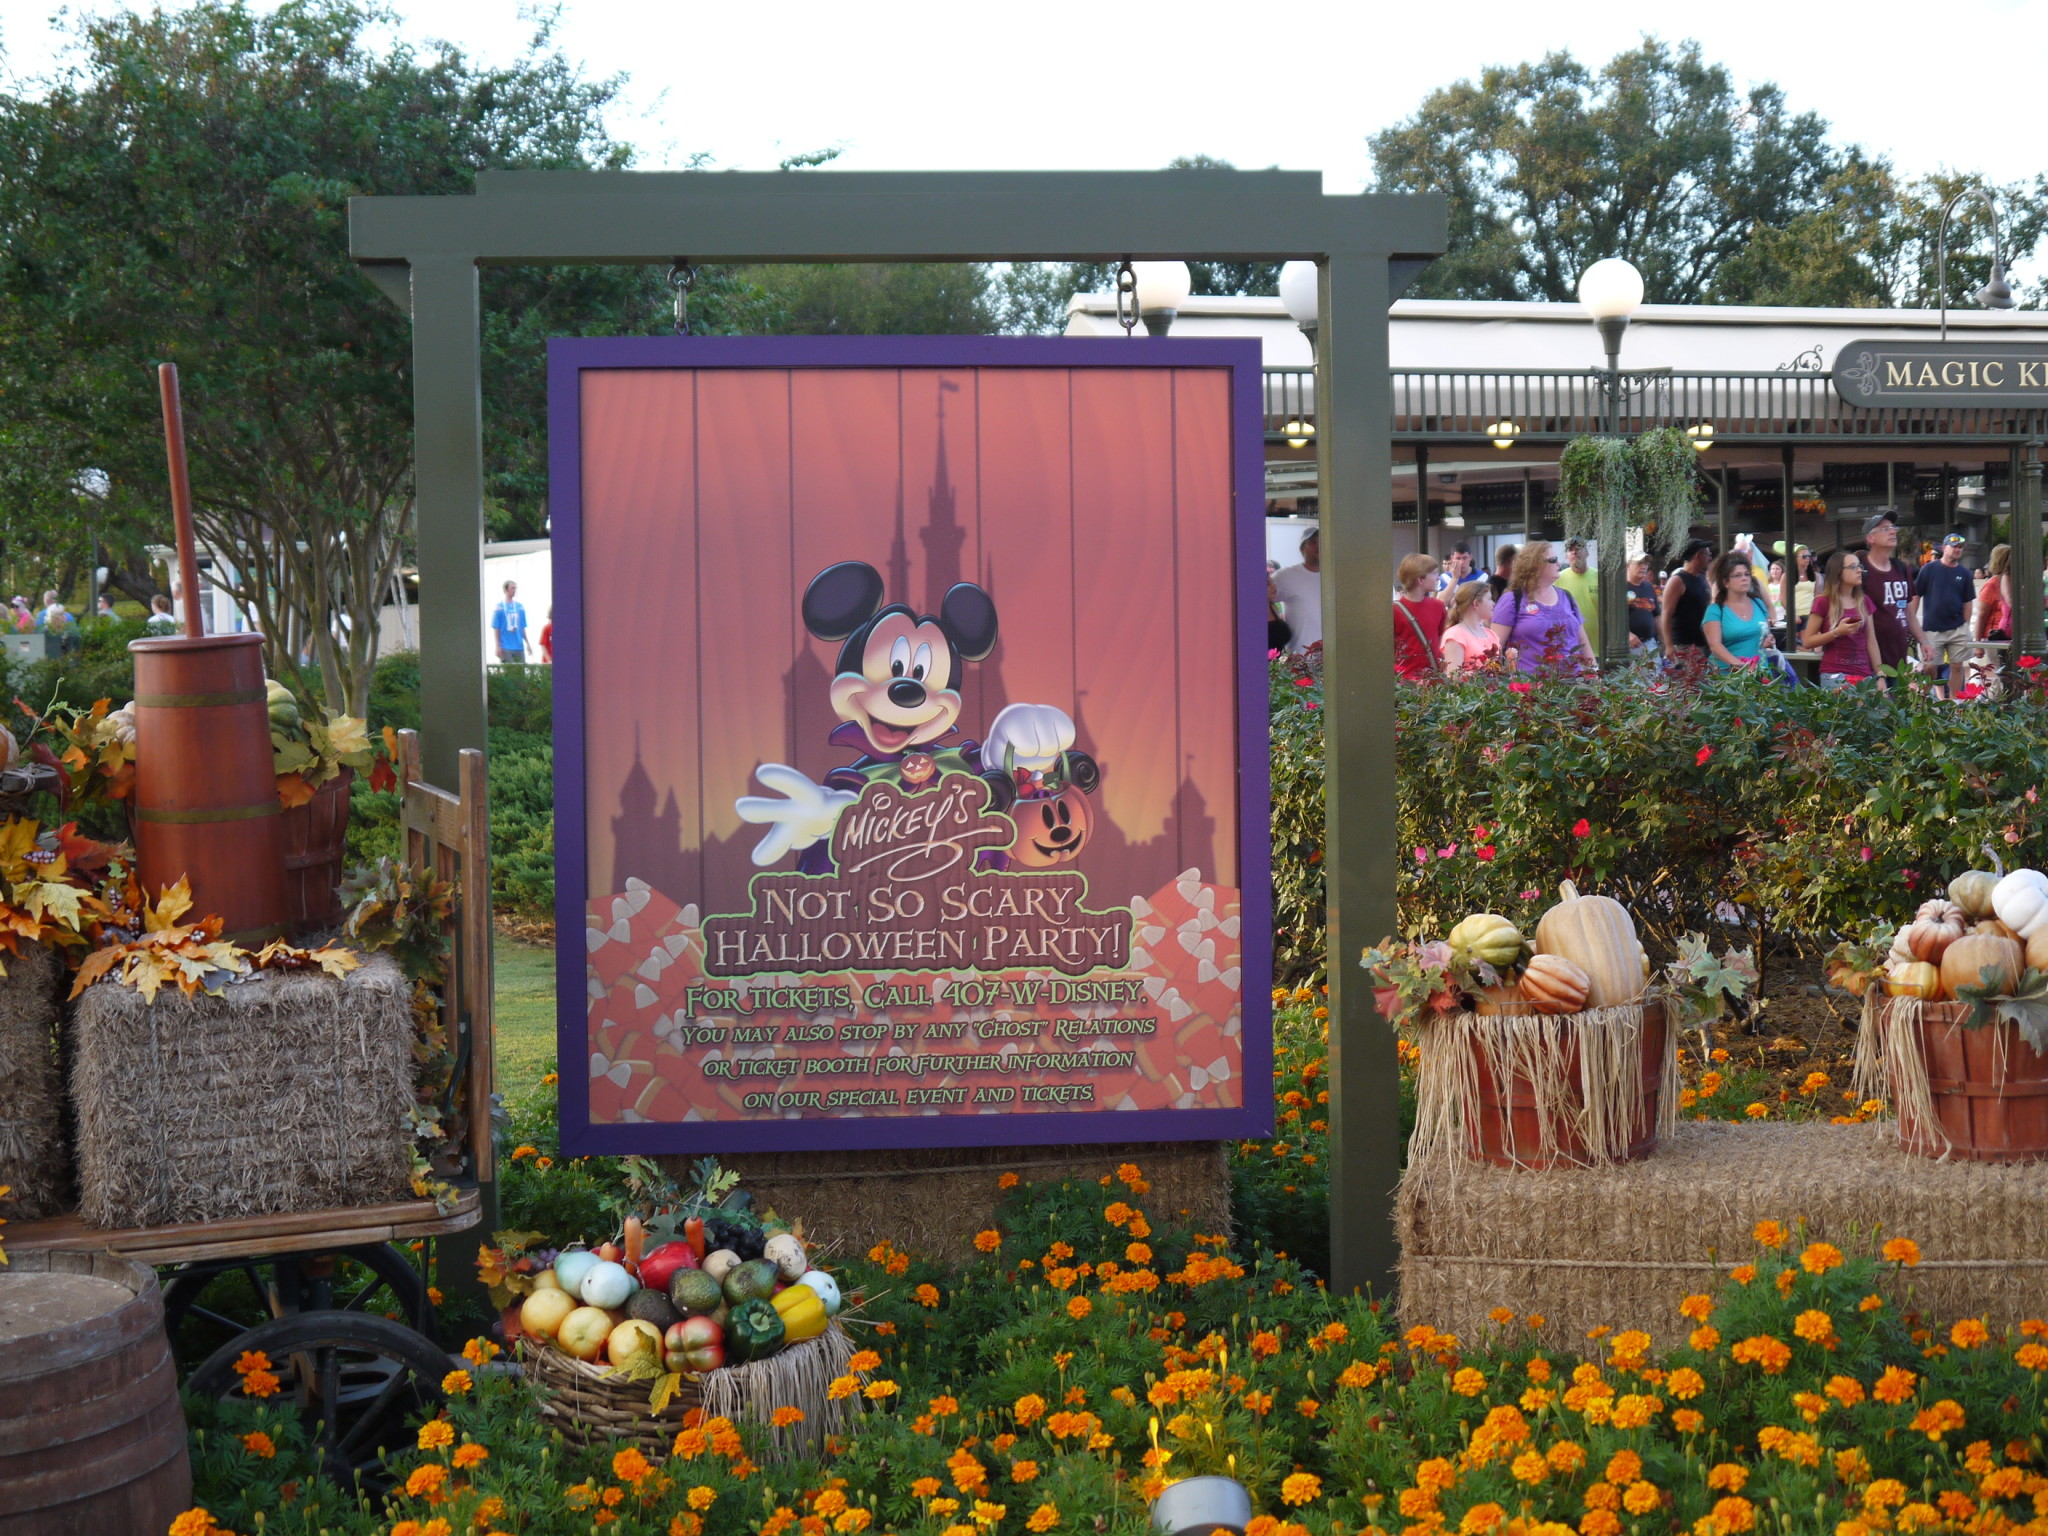 Mickey’s Not So Scary Halloween Party Sells out Halloween Night